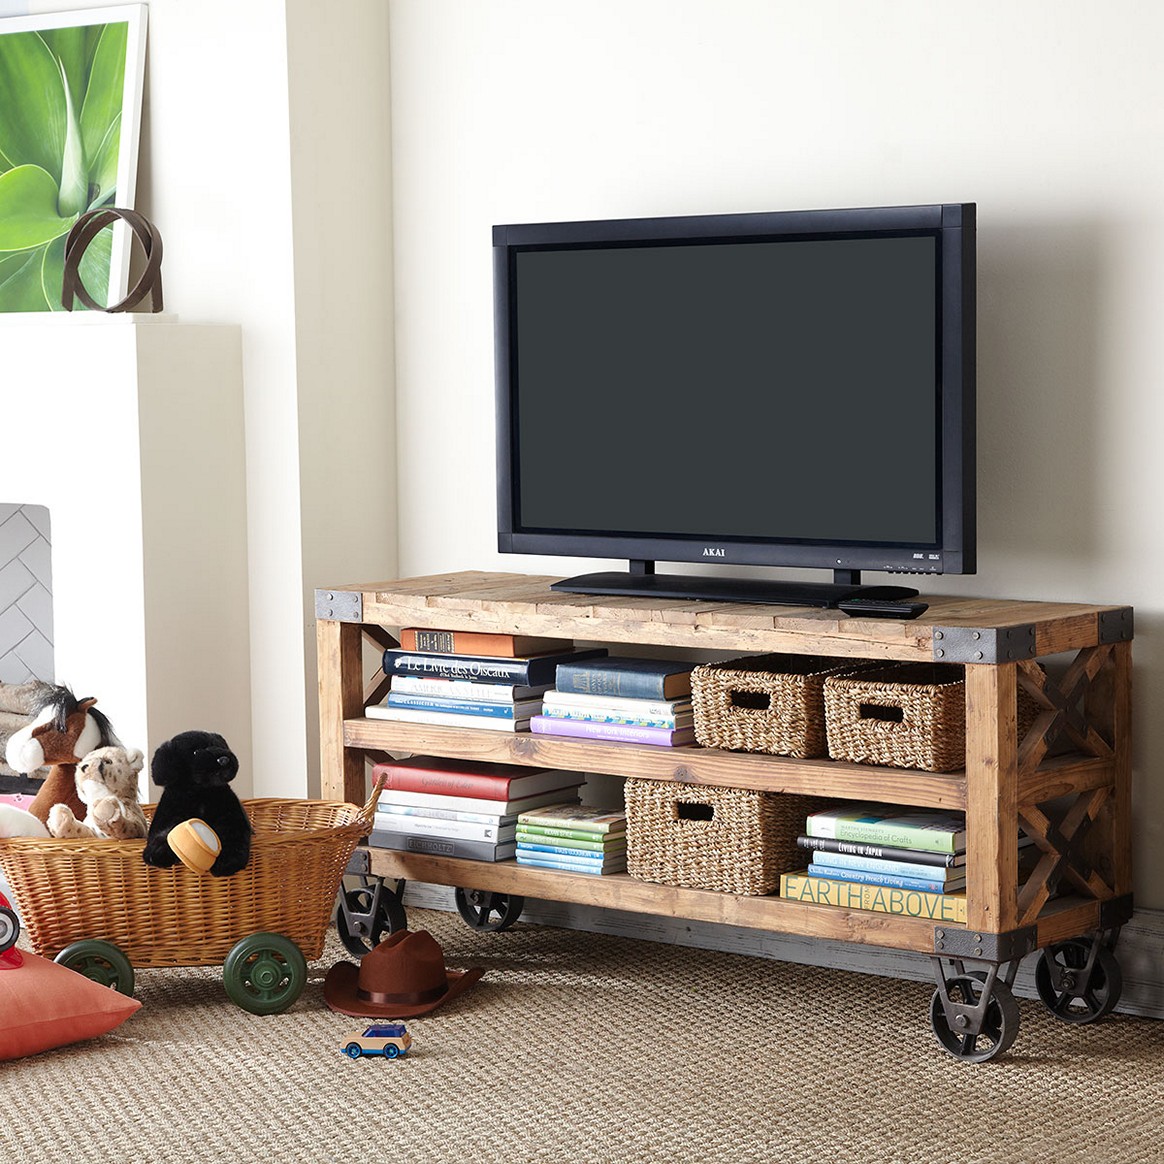 Diy tv stand ideas for your weekend project donpedrobrooklyn.com 3.jpg